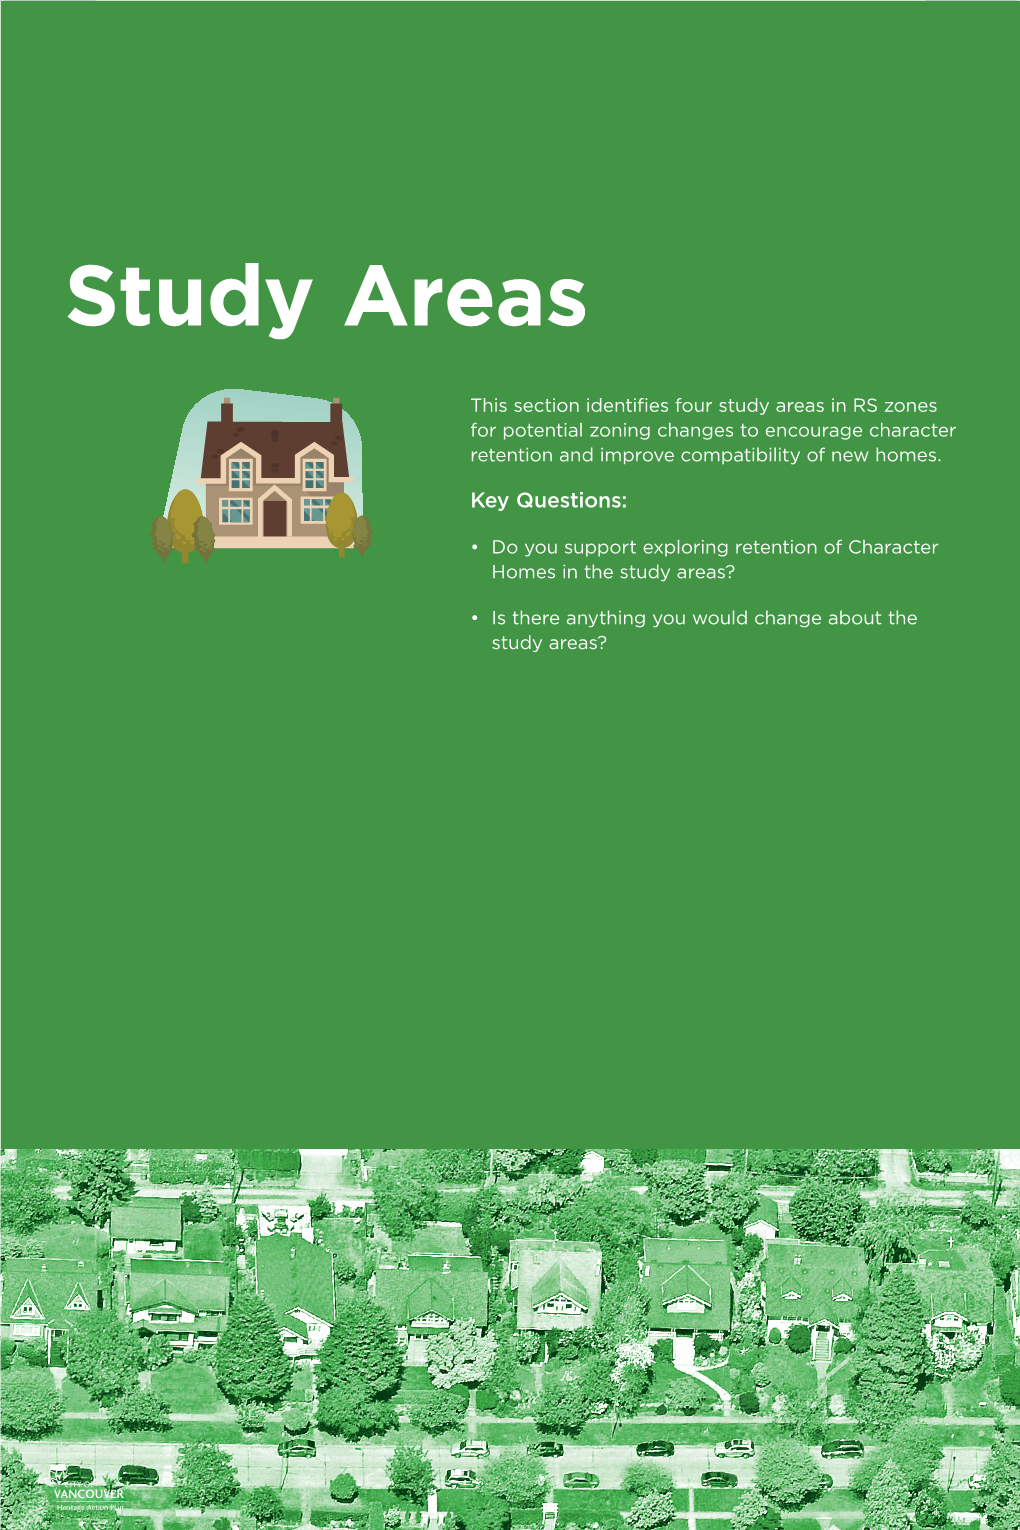 Character Home Zoning Review Study Areas